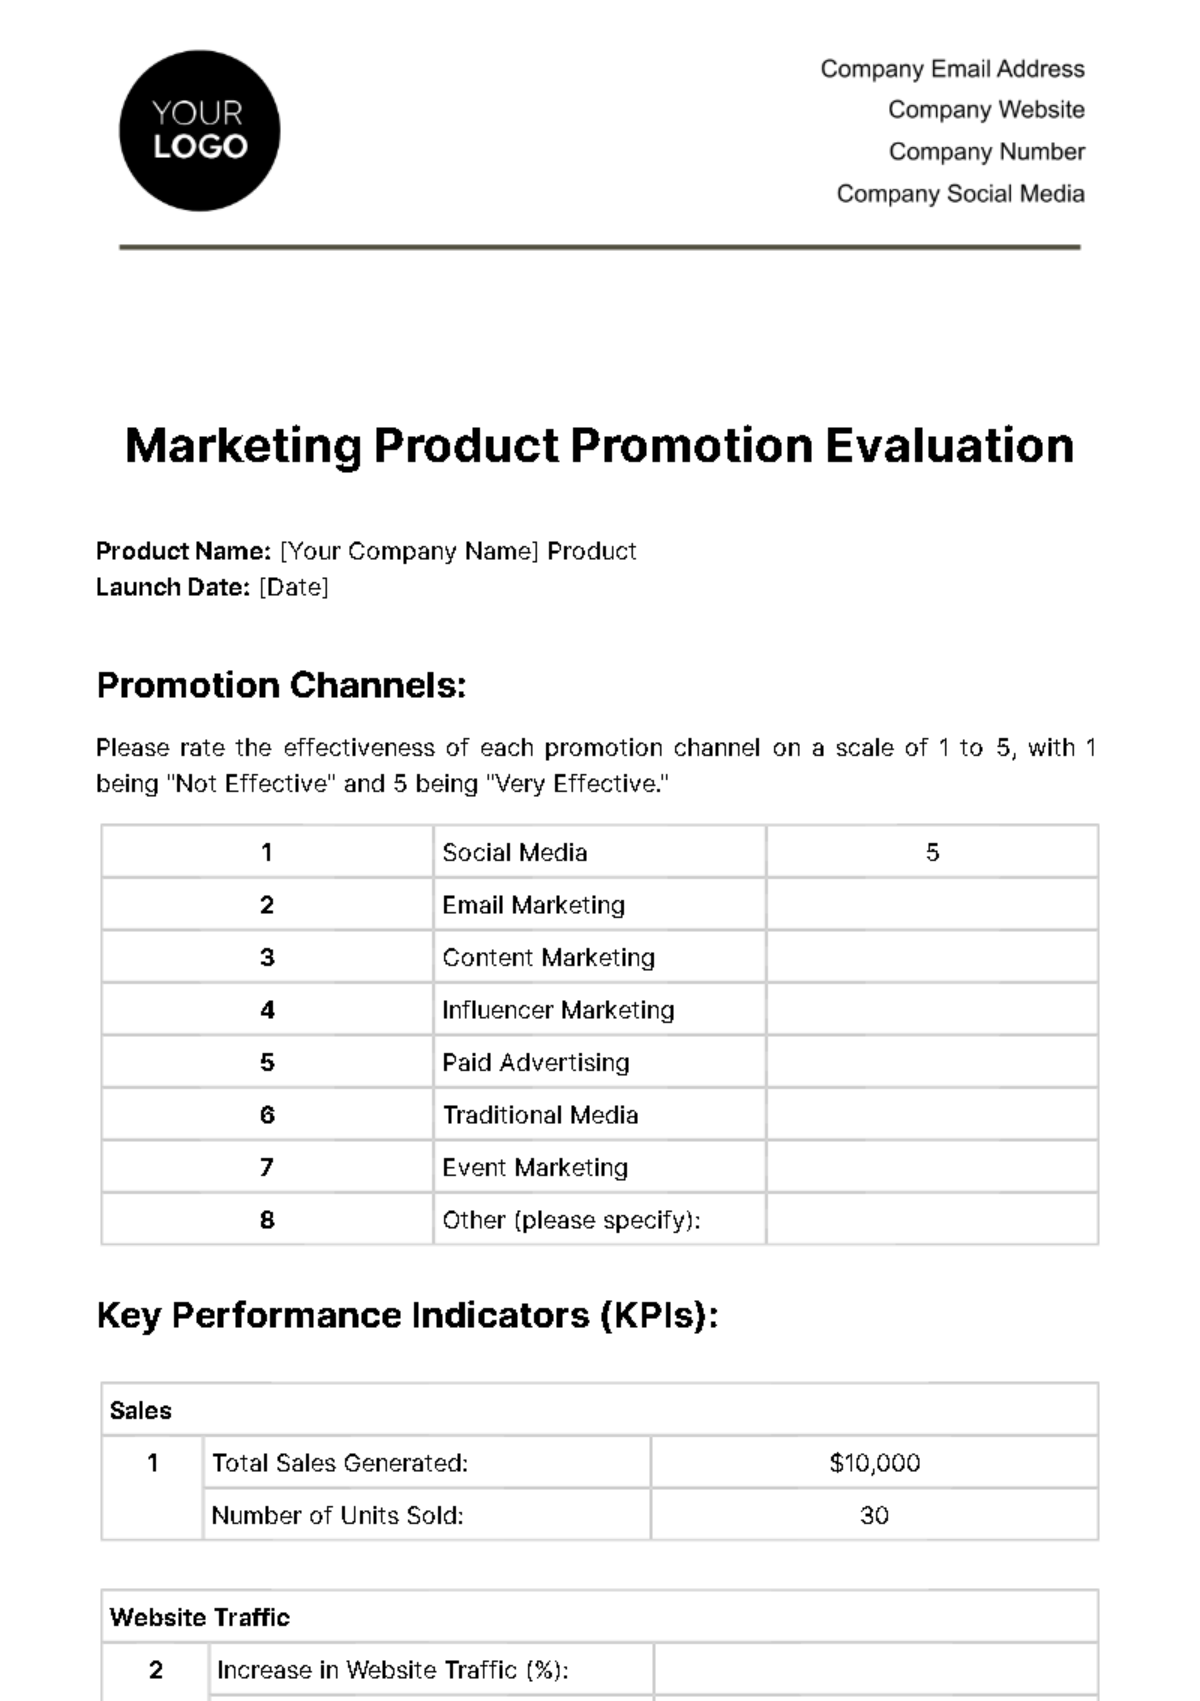 Free Marketing Product Promotion Evaluation Template